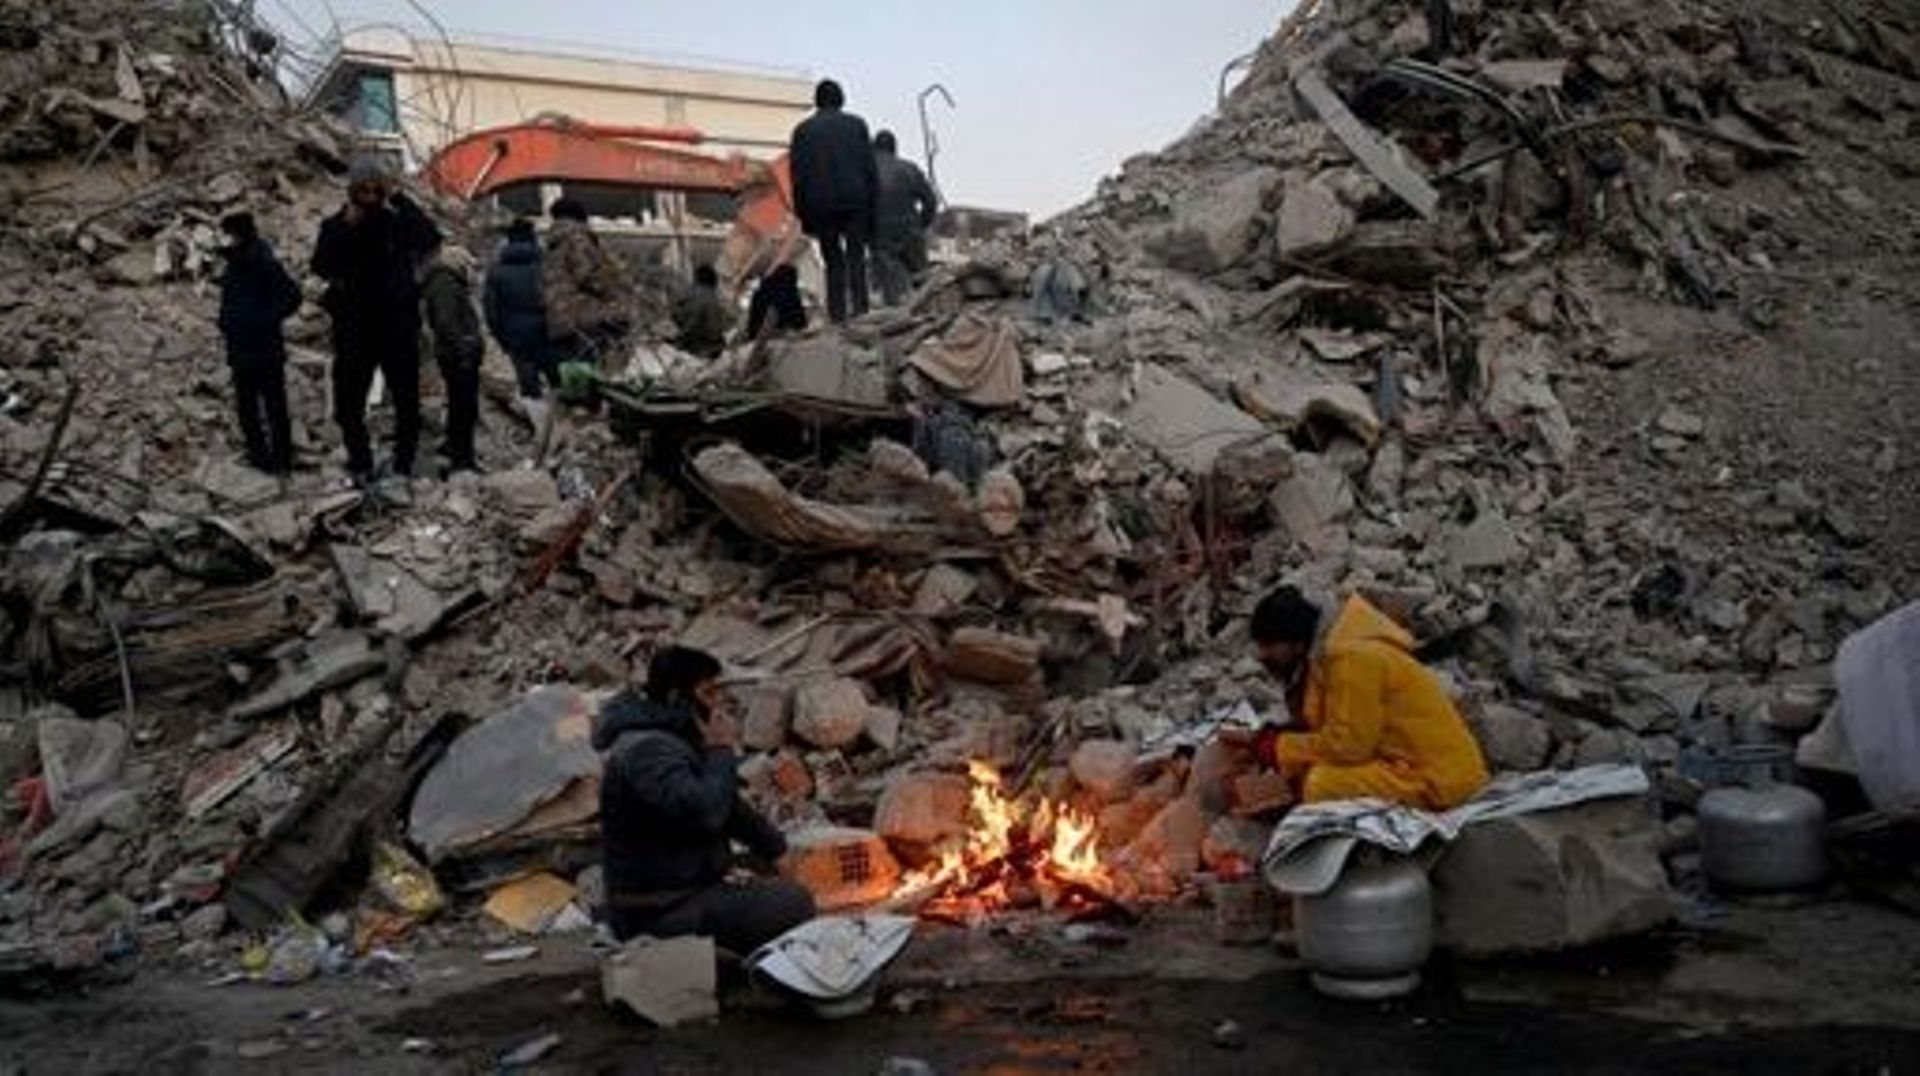 Relatives warm up around a fire in front of rubble of collapsed buildings as rescue teams continue to search victims and survivors, after a 7.8 magnitude earthquake struck the border region of Turkey and Syria earlier in the week, in Kahramanmaras on Febr